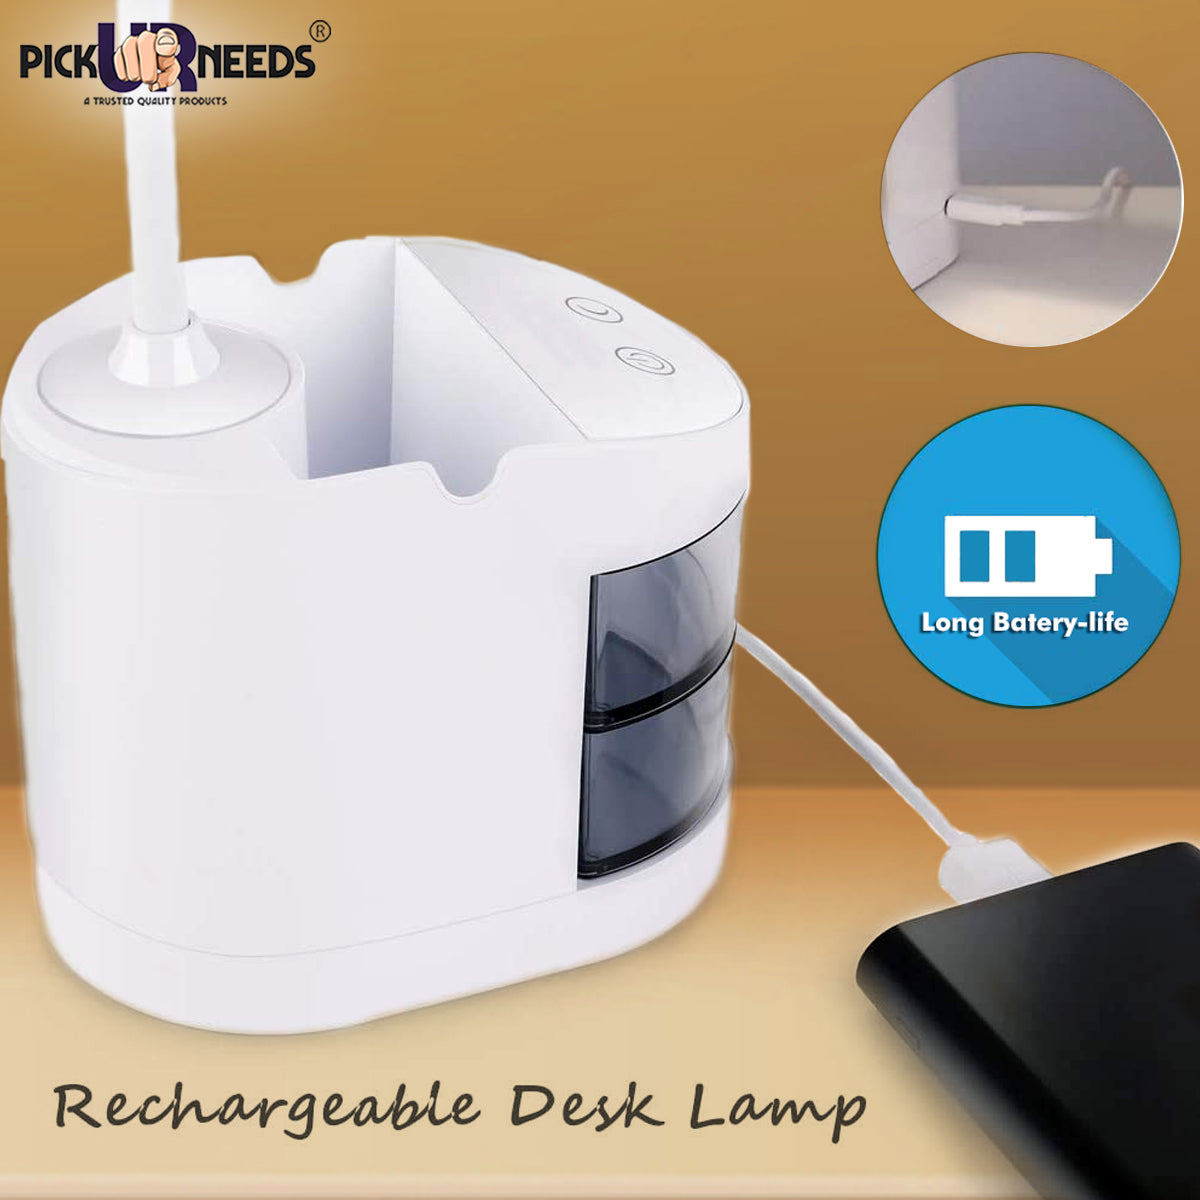 Pick Ur Needs Rechargeable Foldable Portable LED Light USB Eye Protection Table/Desk Lamp Touch Control